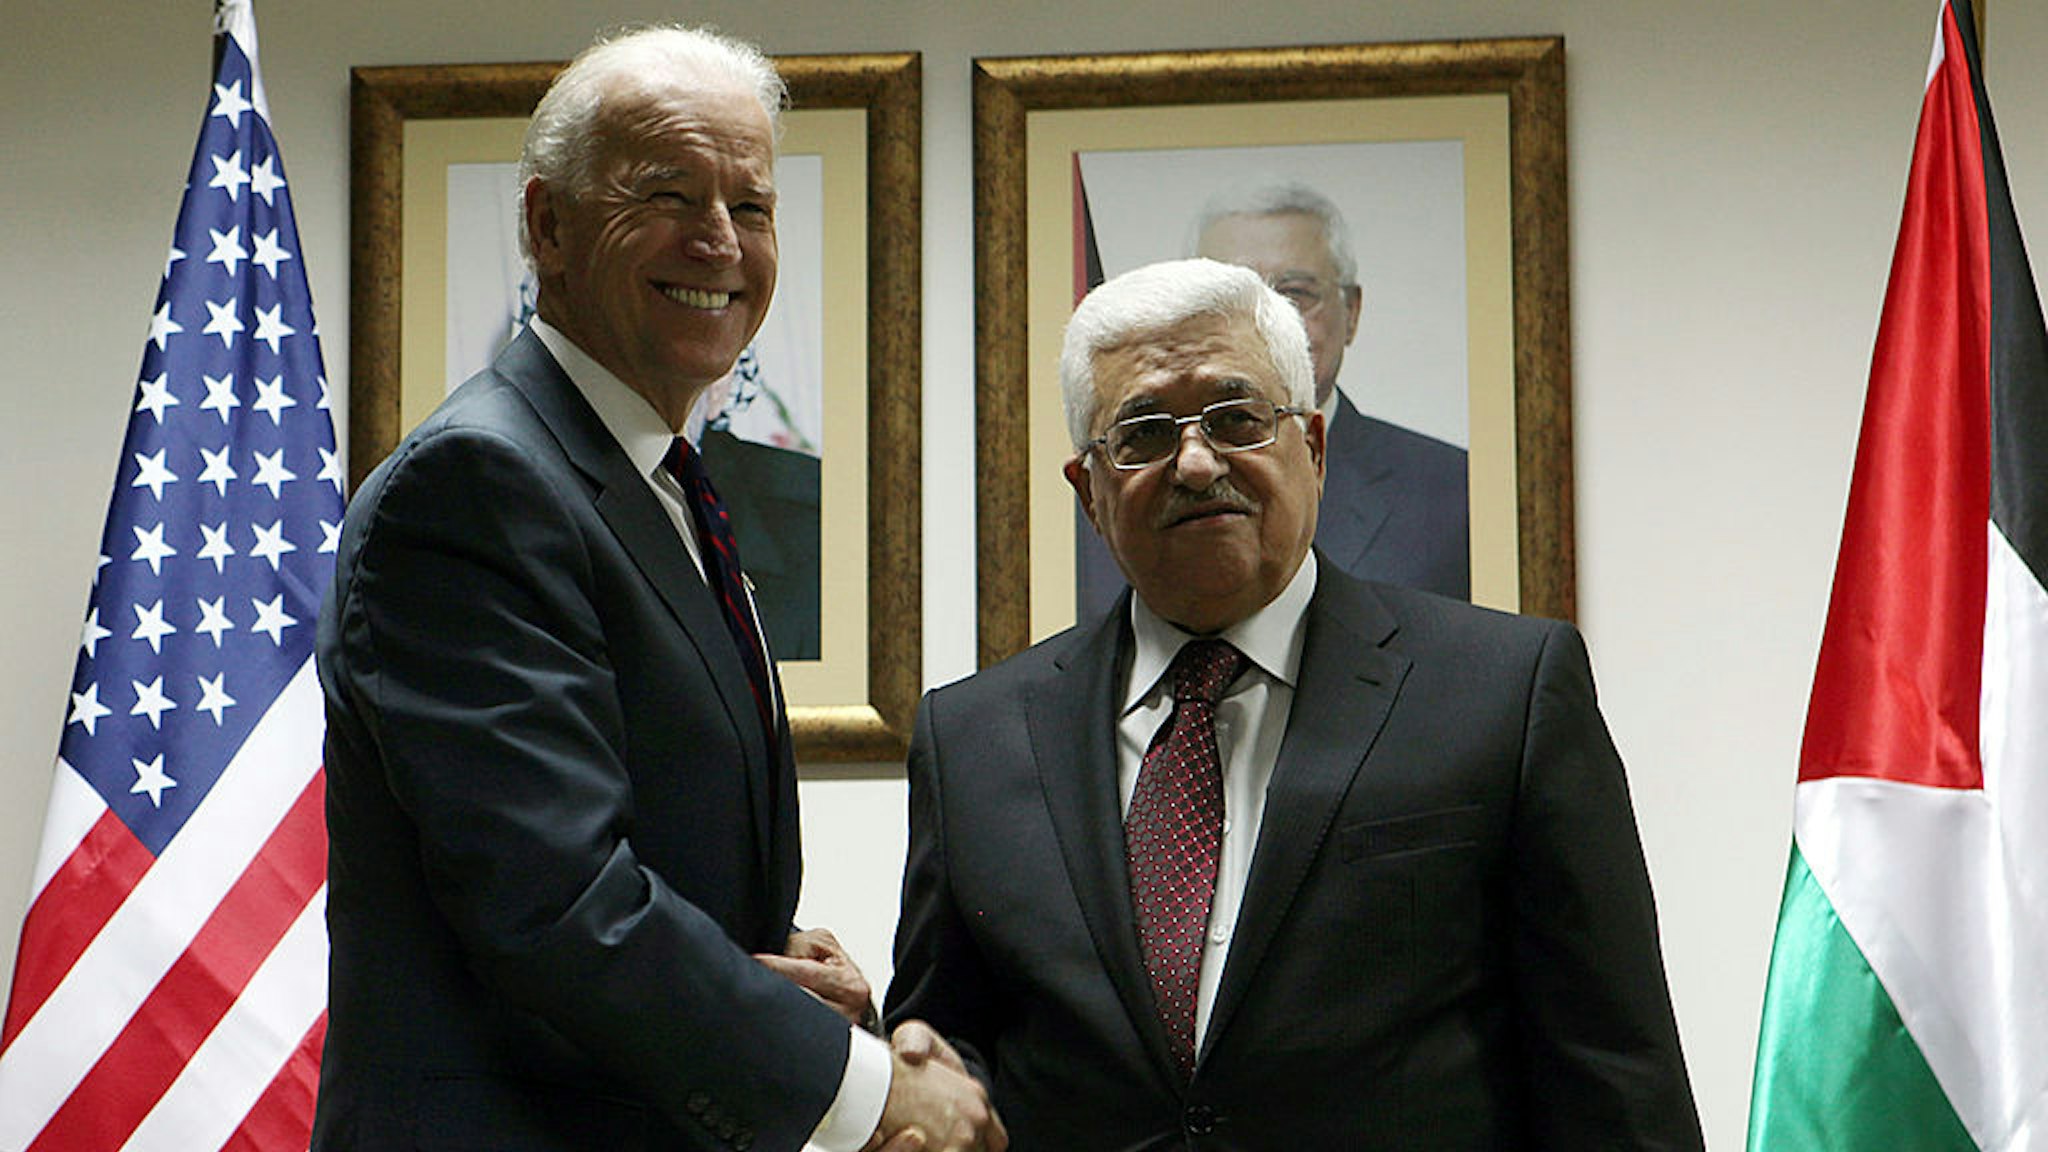 US Vice President Joe Biden (L) and Palestinian President Mahmoud Abbas shake hands during their meeting at the Presidential compound on March 10, 2010 in Ramallah, West Bank.